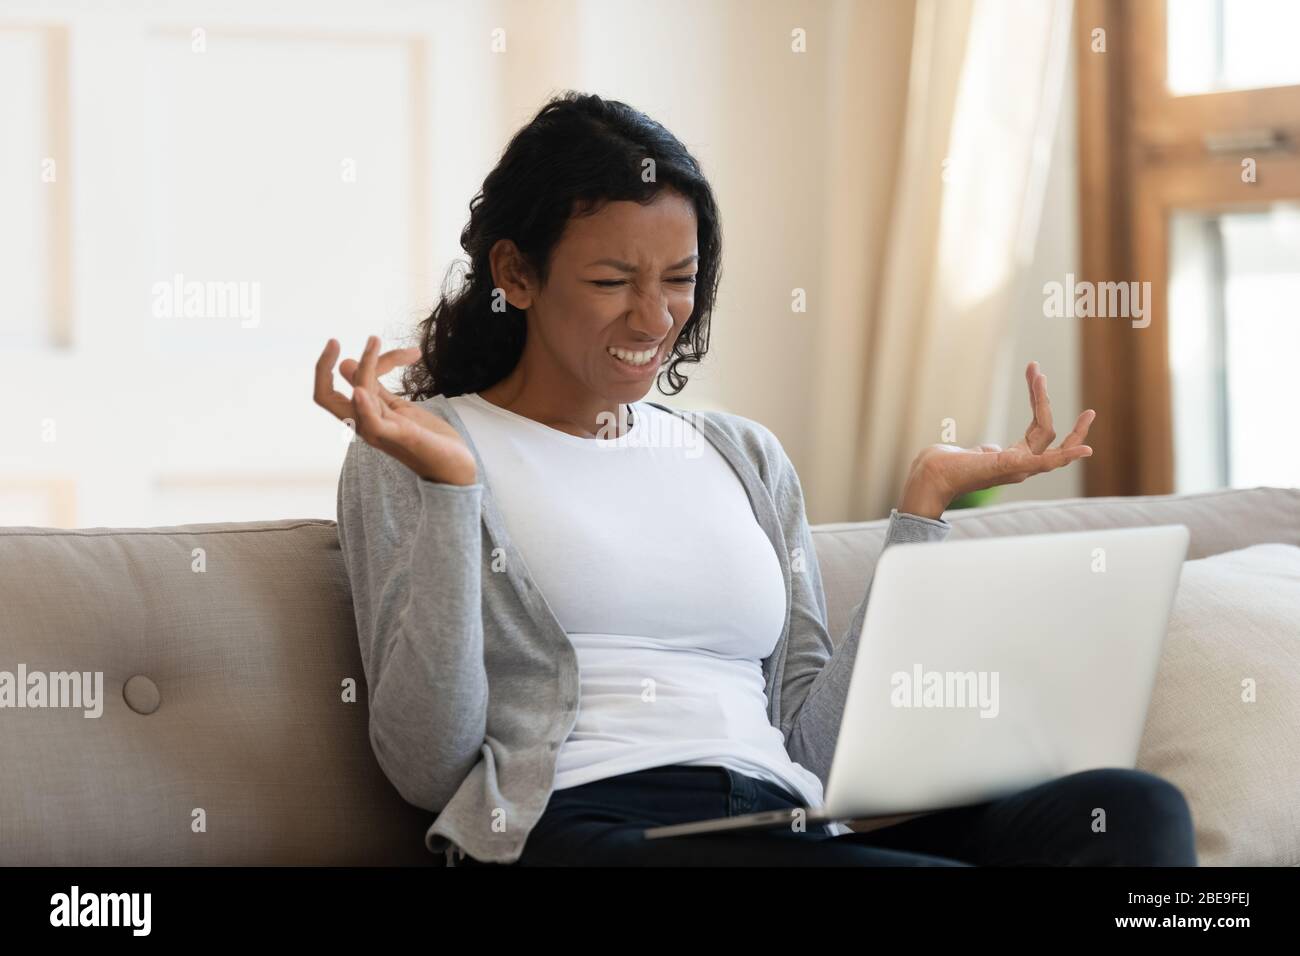 Annoyed young black girl looking at laptop screen Stock Photo